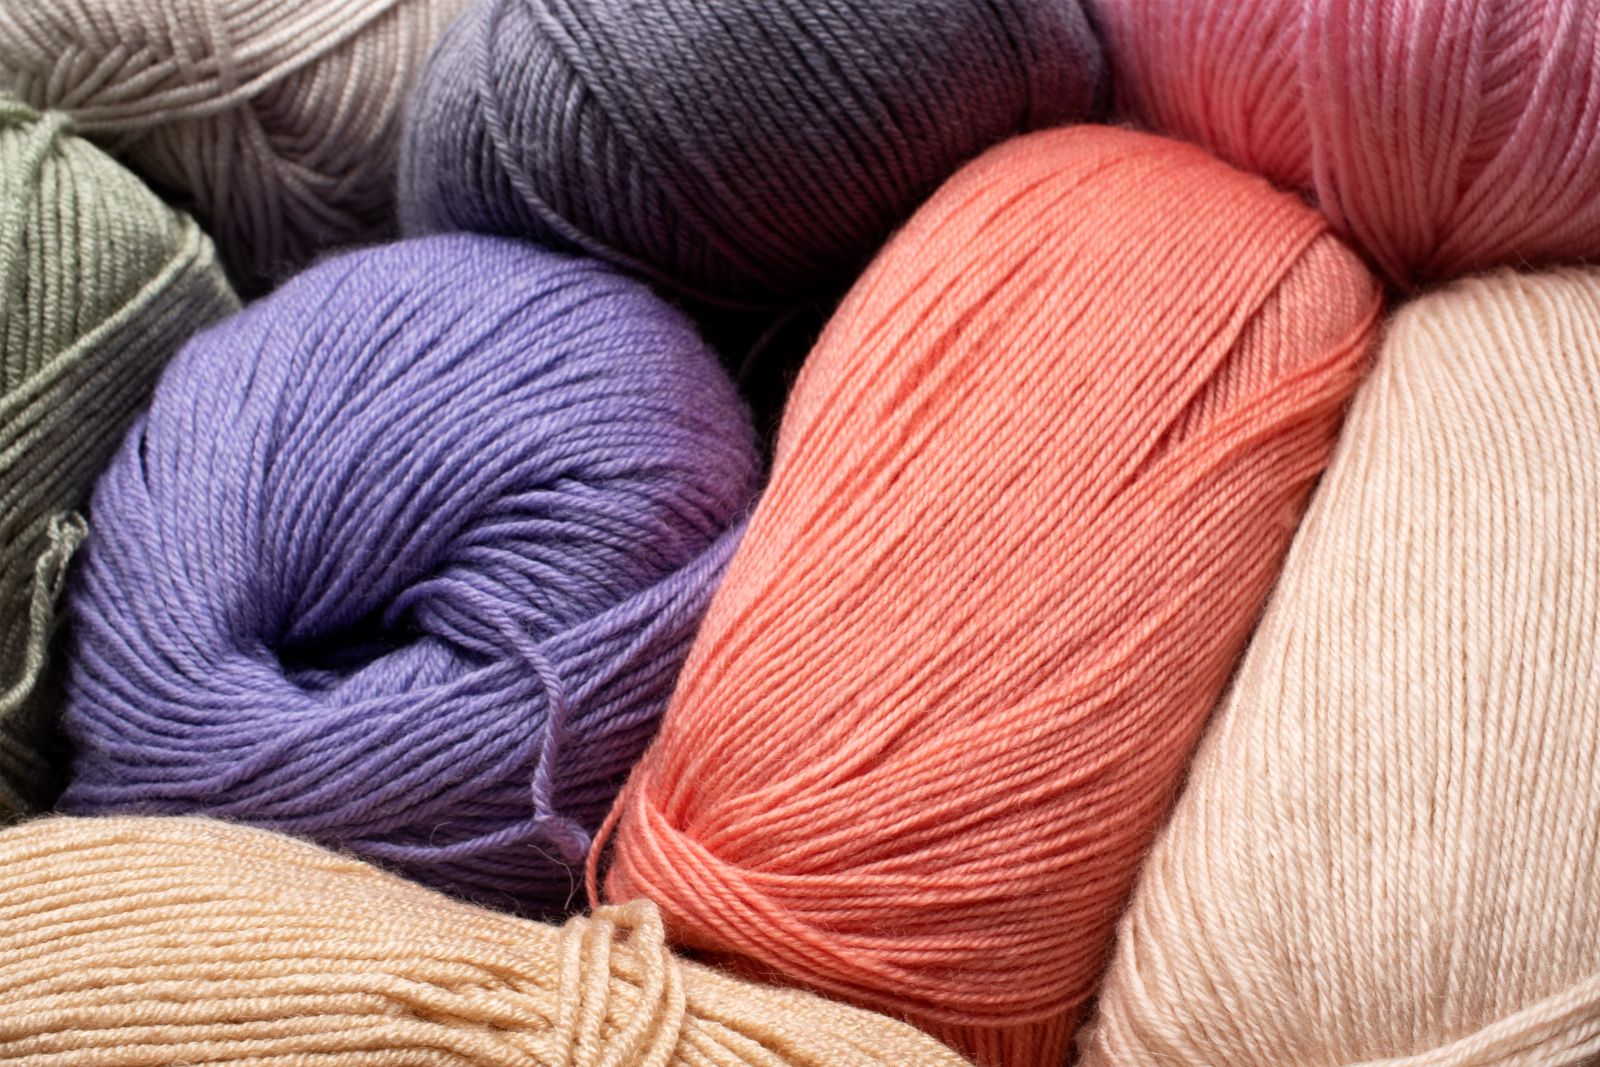 The Yarn Dyeing Process & Methods to Dye Your Own Yarn